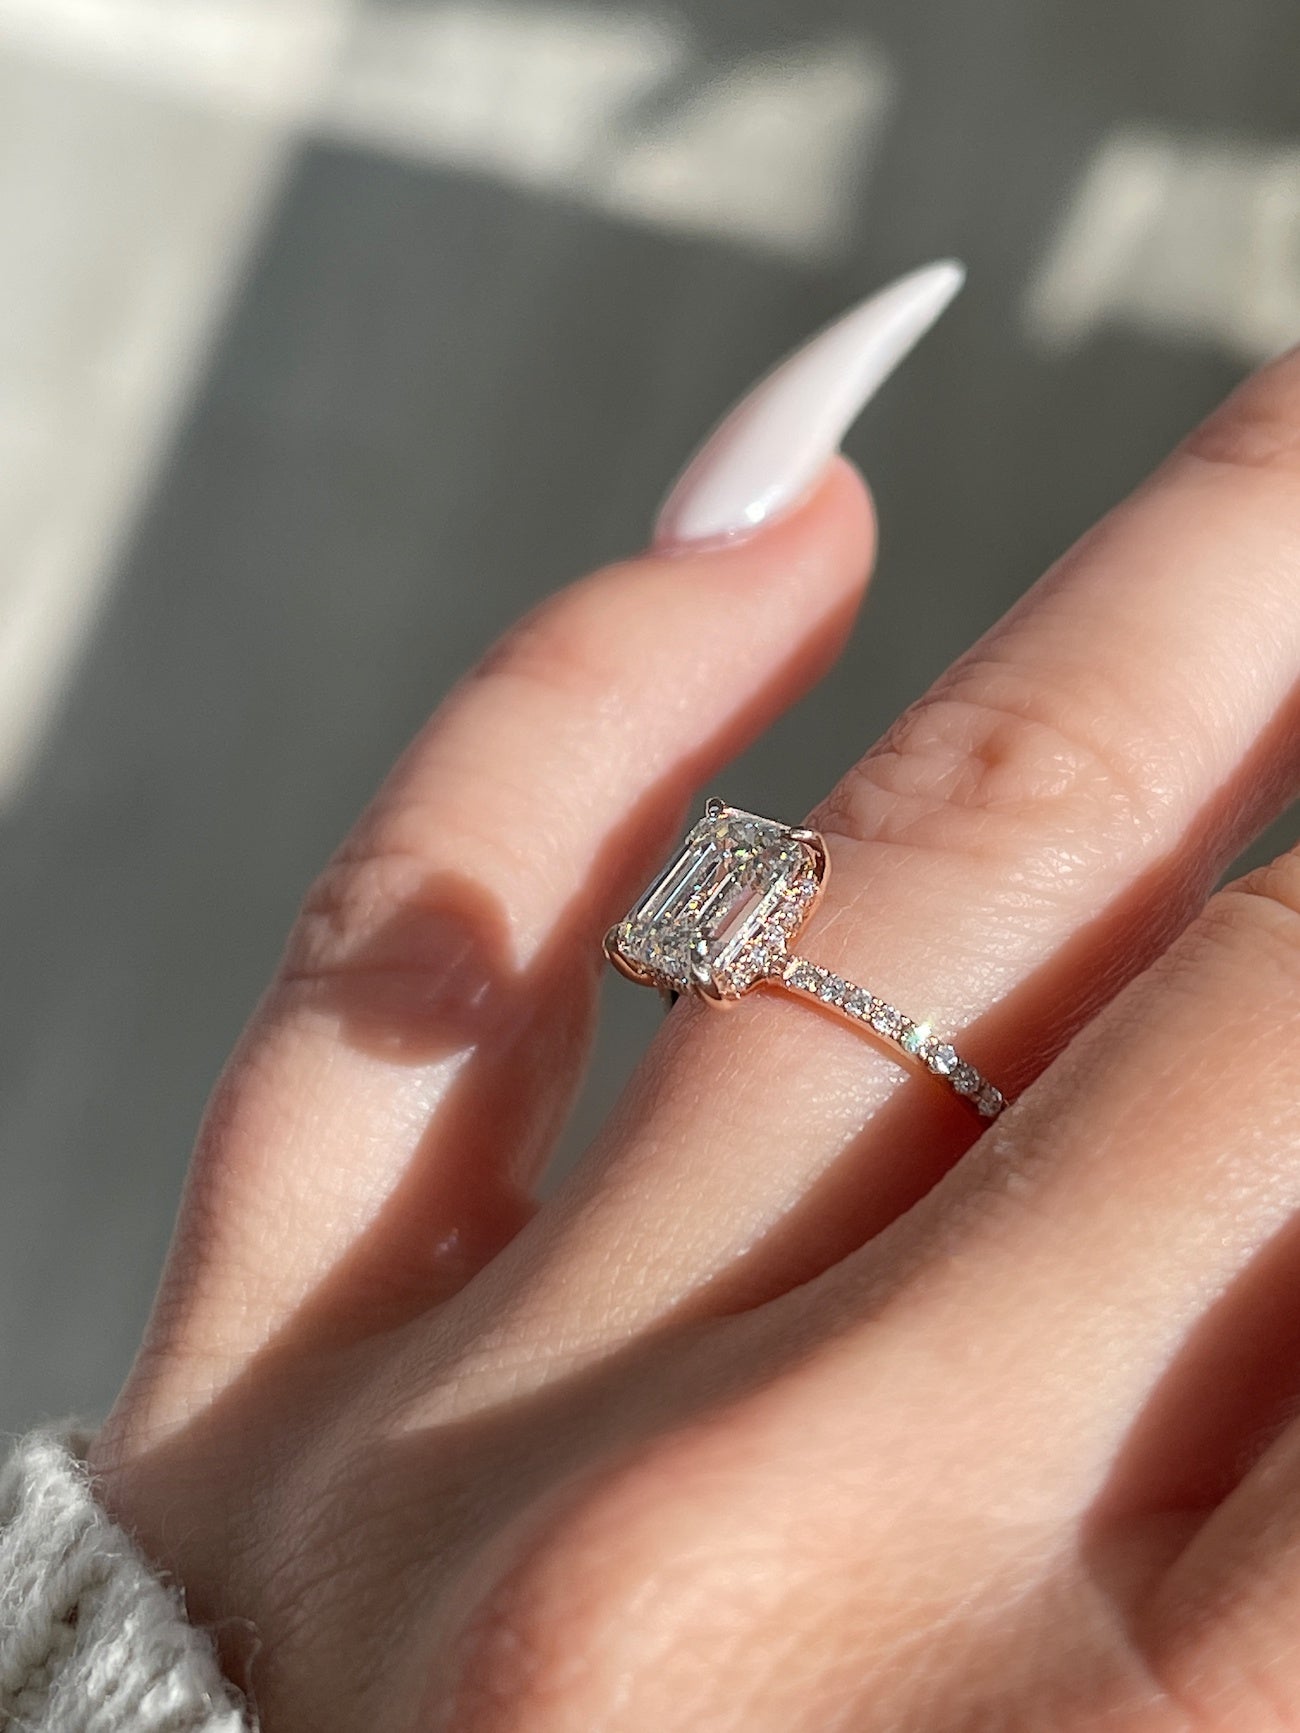 Load image into Gallery viewer, Engagement Ring Wednesday | 1.50 Emerald Cut Diamond | Rose Gold Hidden Halo Setting - Happy Jewelers Fine Jewelry Lifetime Warranty
